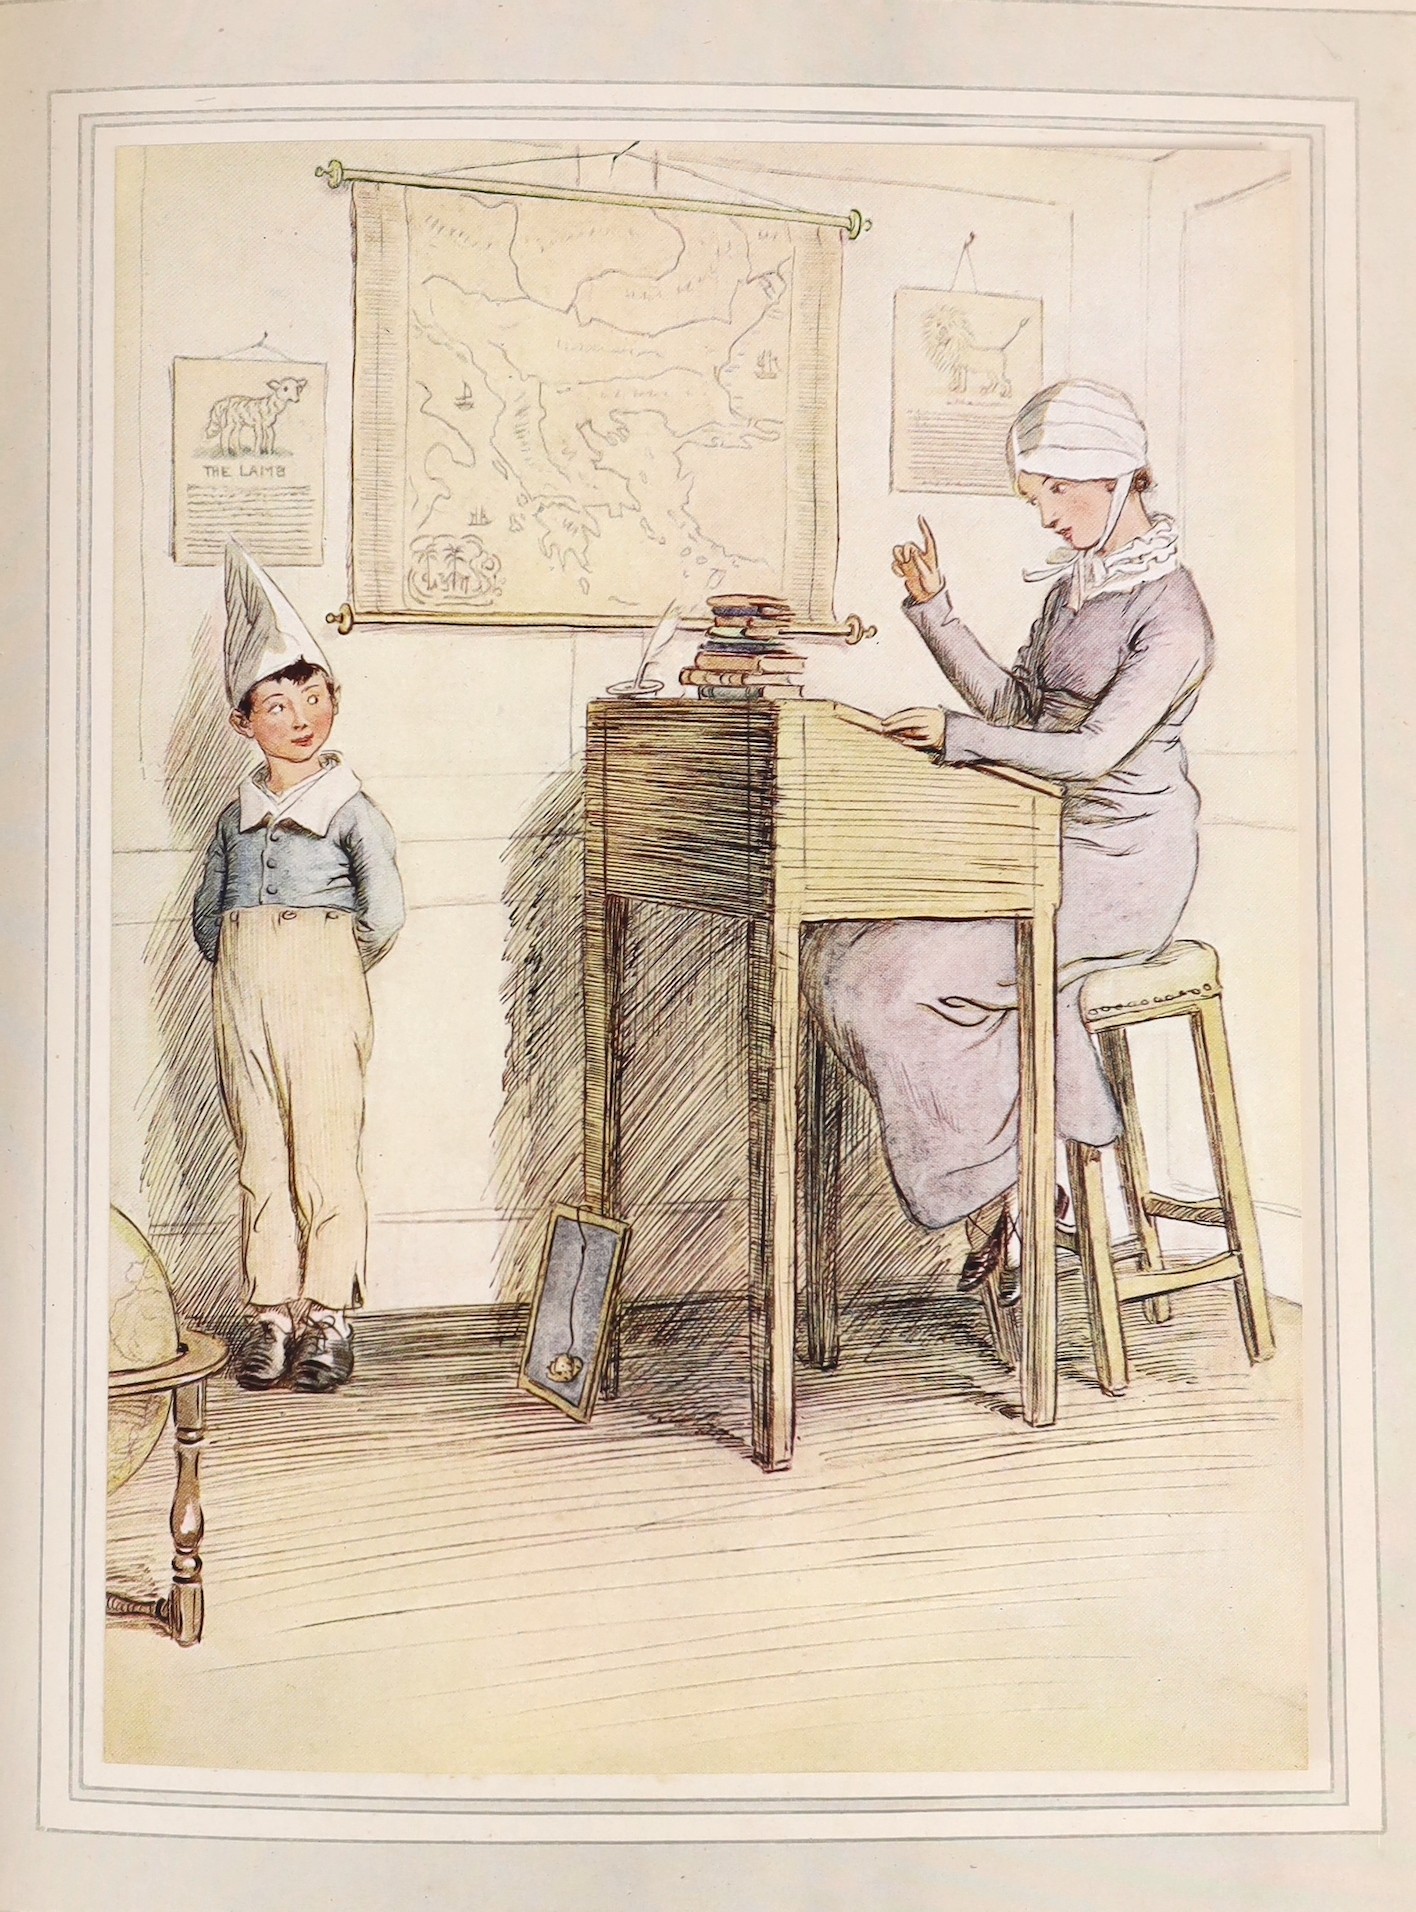 Barrie, J.M - Quality Street, illustrated by Hugh Thomson, with 22 tipped-in colour plates, 4to, lilac cloth gilt, Hodder and Stoughton, London, 1901